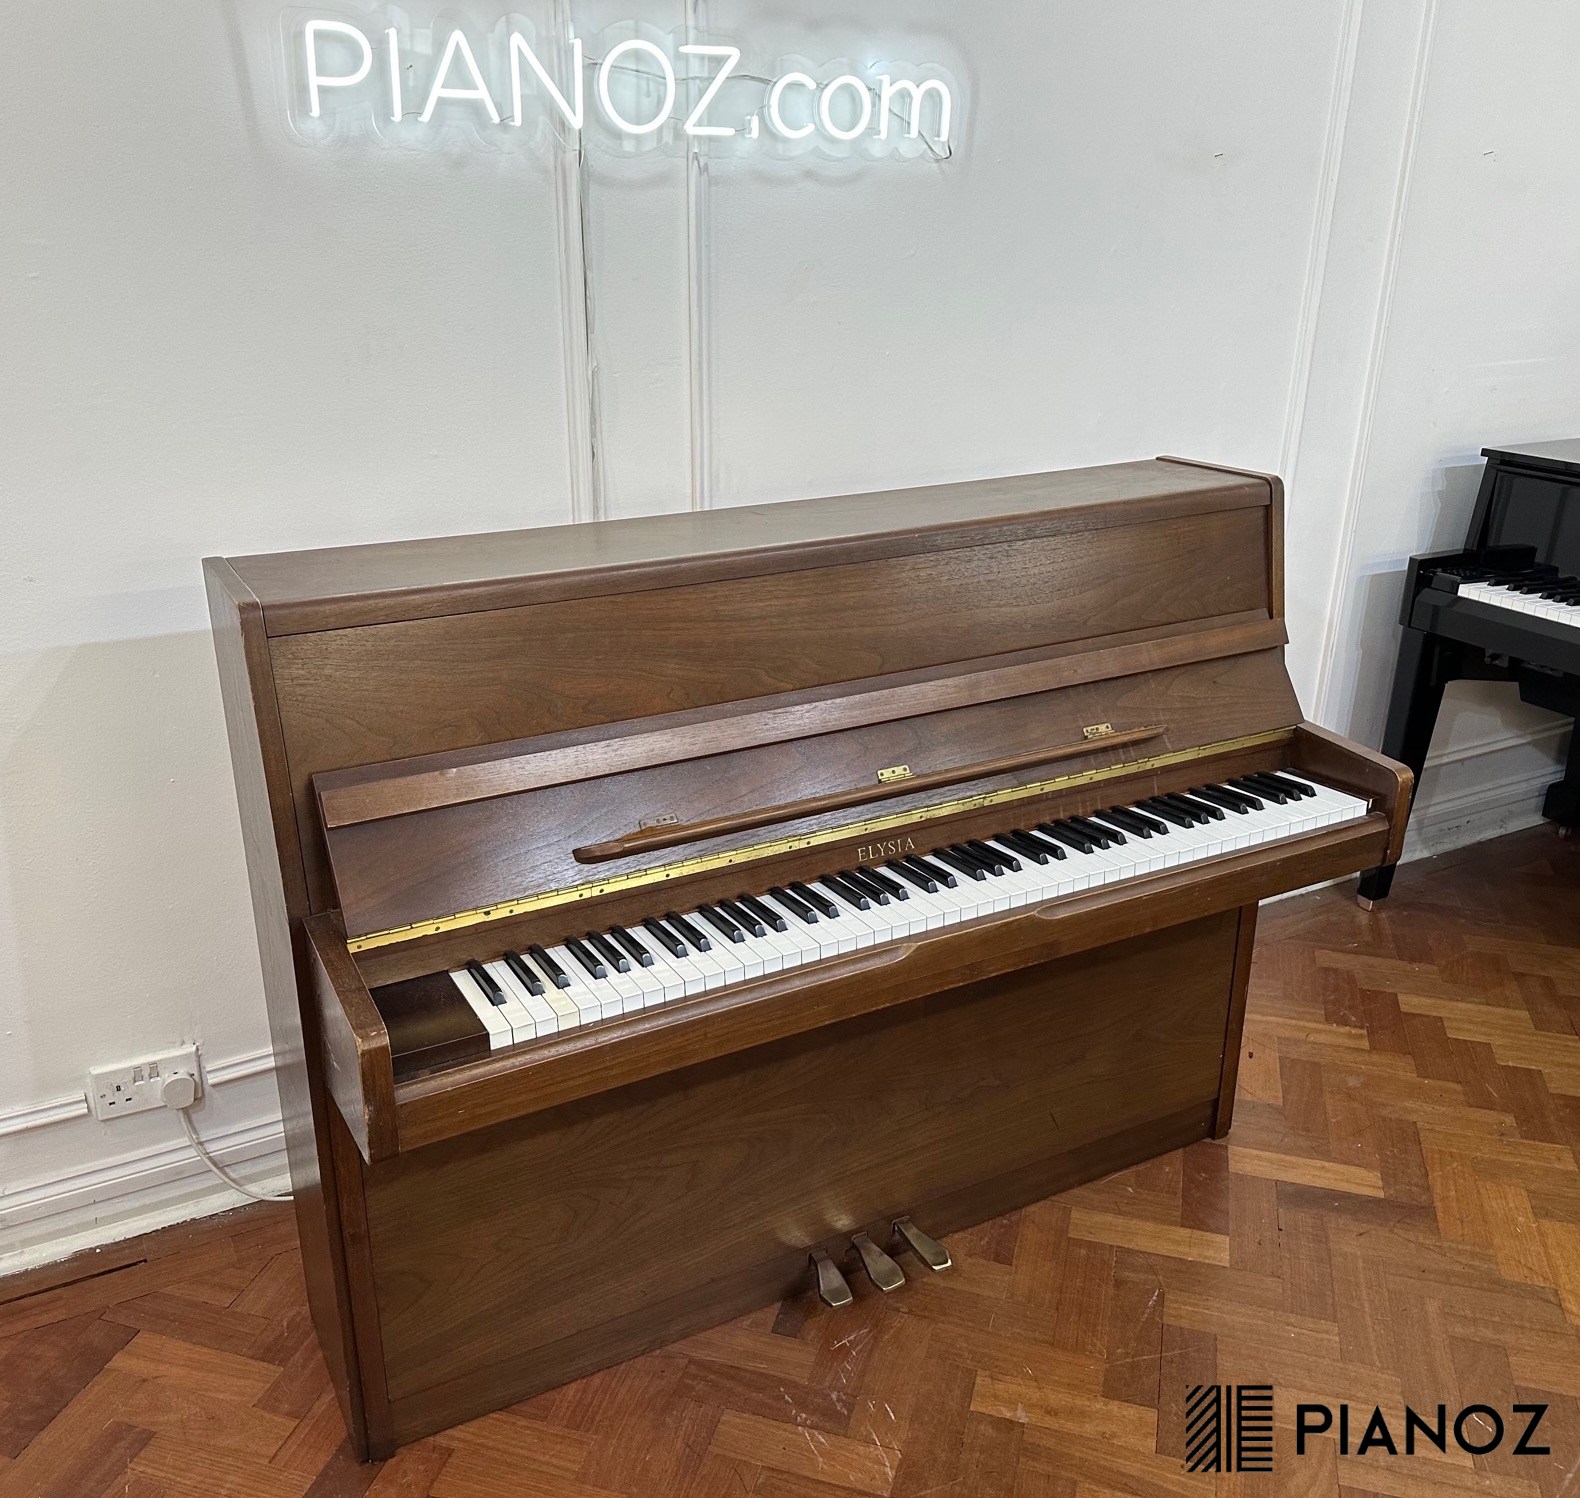 Elysian 108 Upright Piano piano for sale in UK